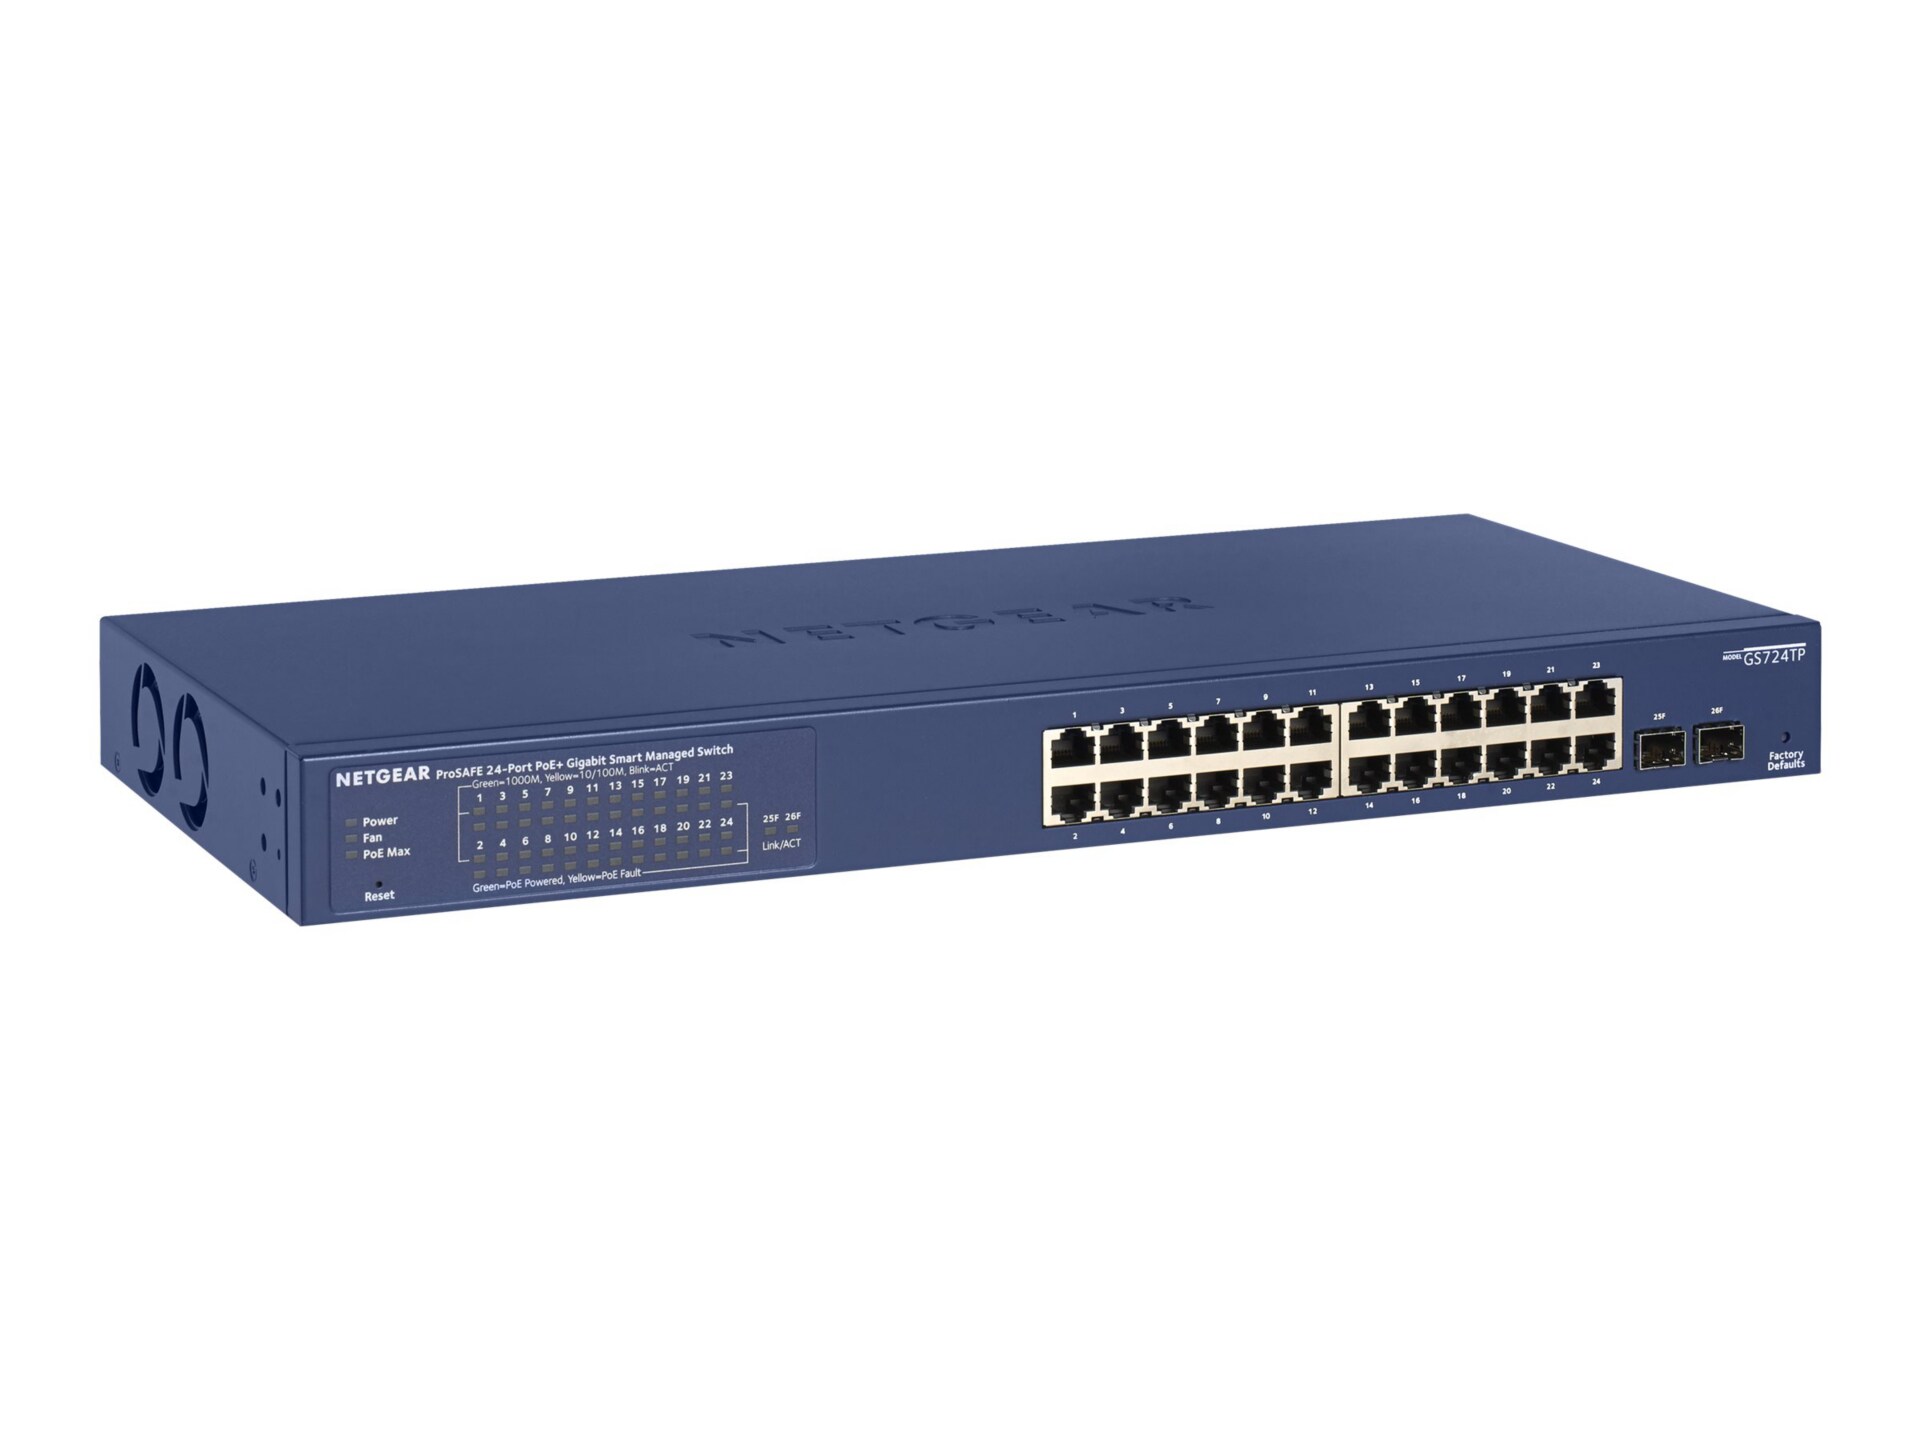 What Is Ethernet Hub [Know Top Informative Types of Ethernet Hubs